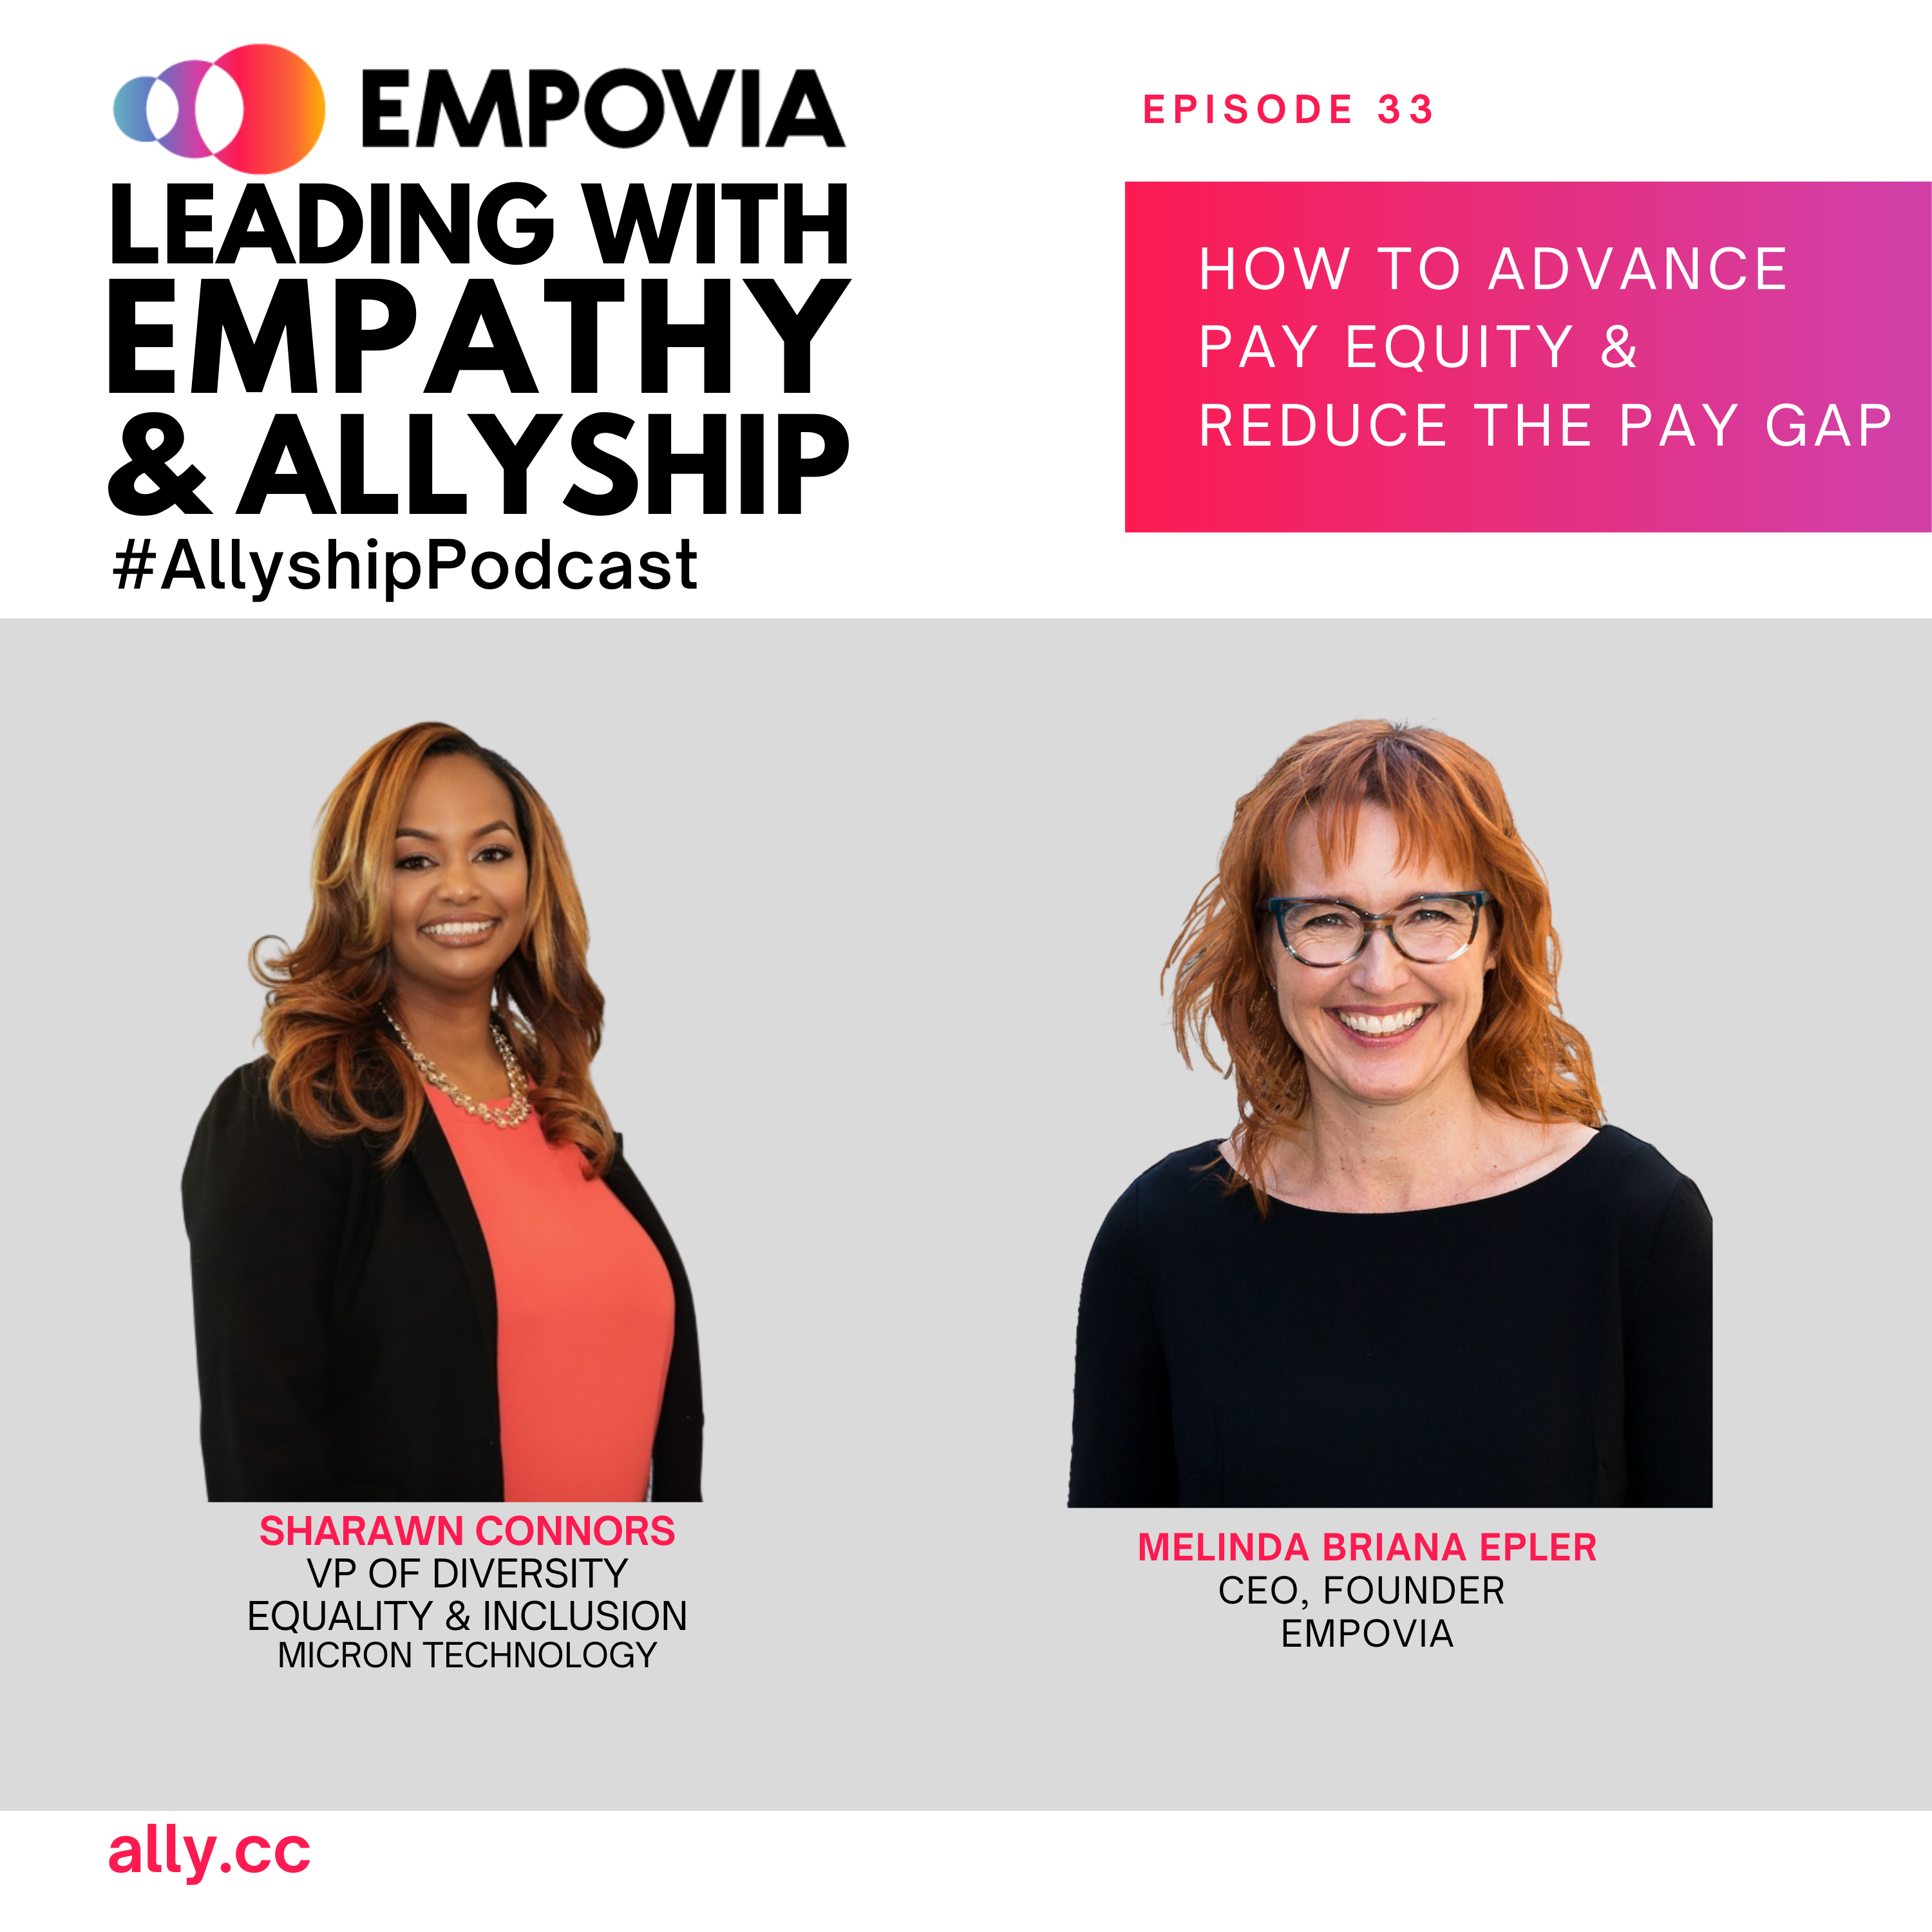 Leading With Empathy & Allyship promo with the Empovia logo and photos of host Melinda Briana Epler, a White woman with red hair and glasses, and Sharawn Connors, a Black woman with medium auburn hair, orange blouse, and black jacket.